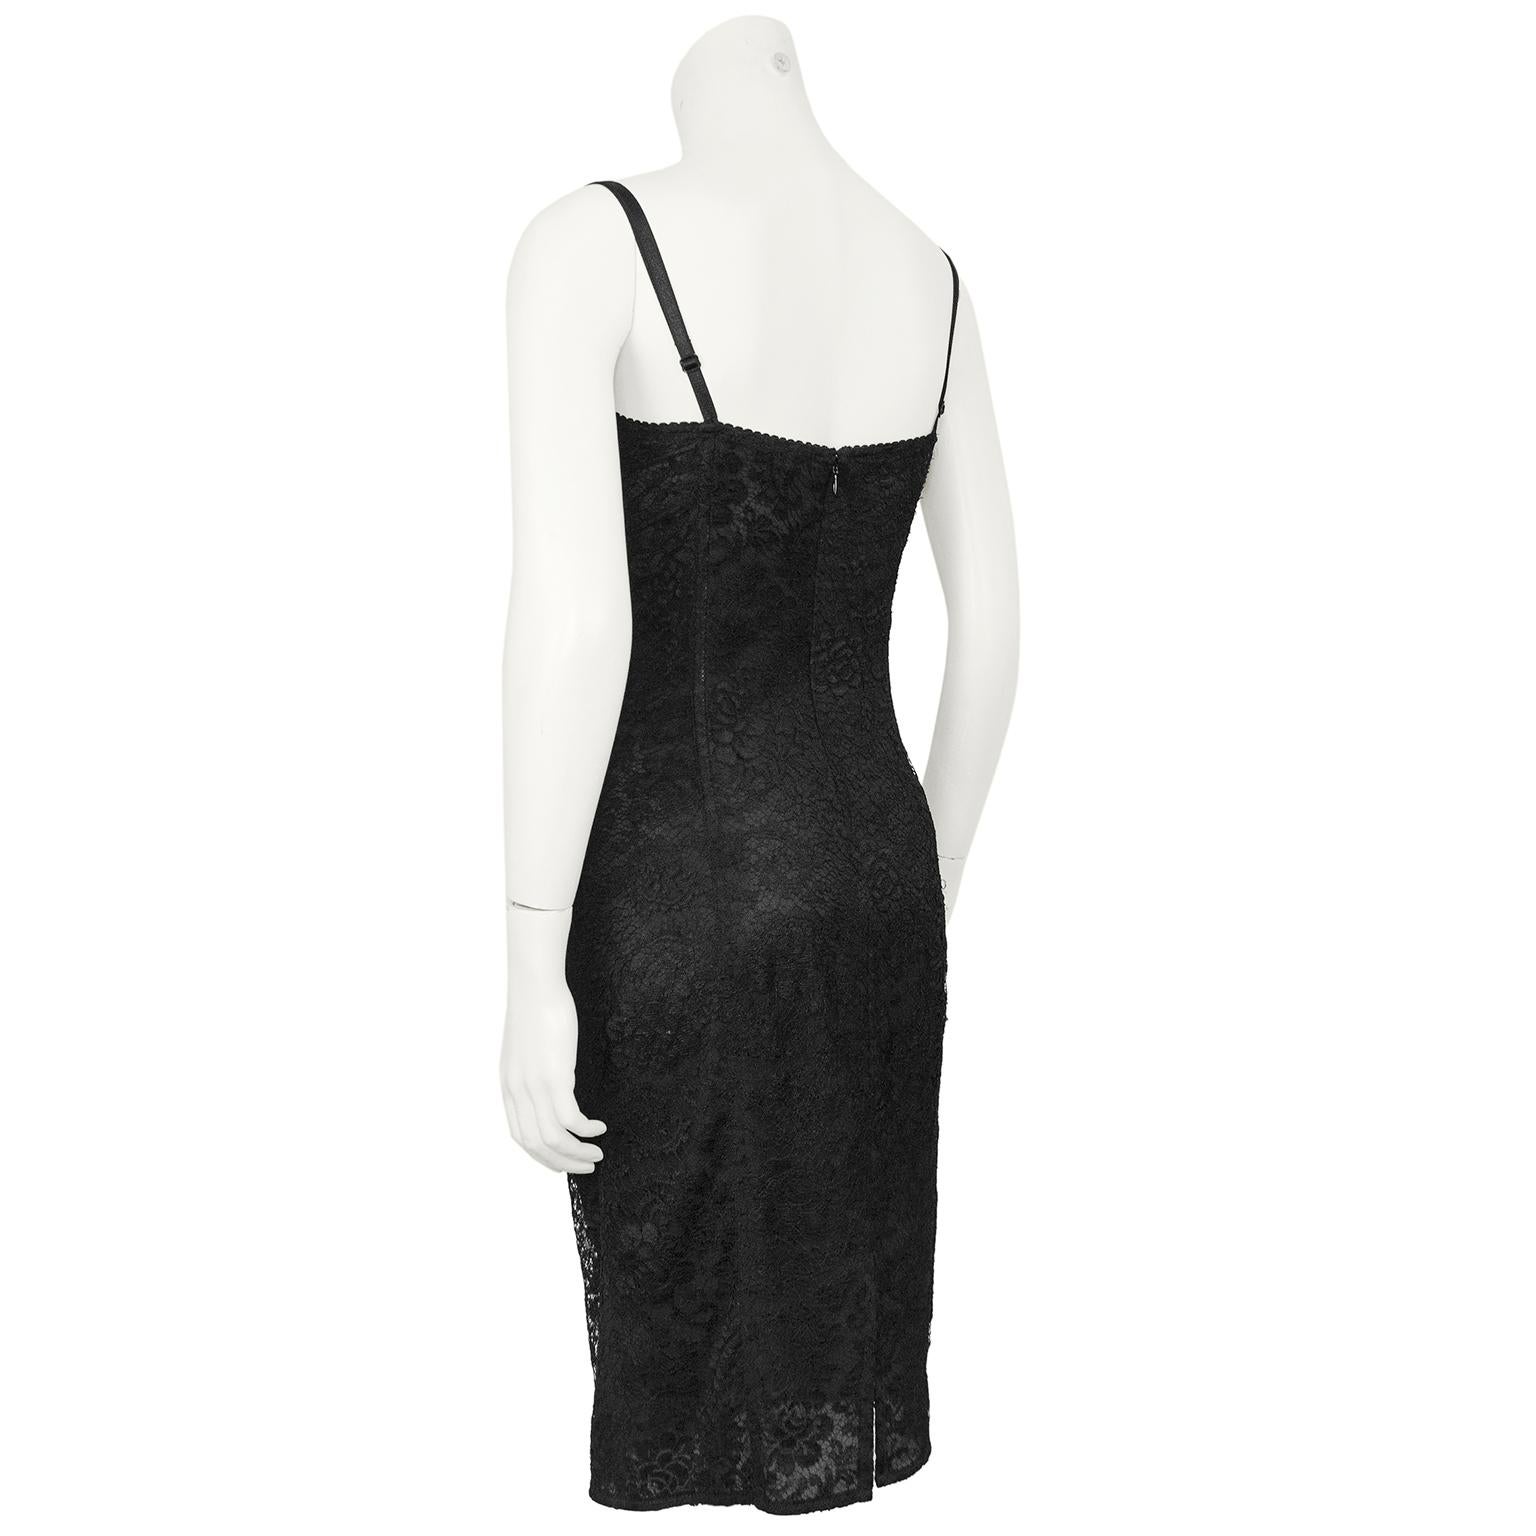 Early 2000s Dolce and Gabbana Black Lace Cocktail Dress In Good Condition For Sale In Toronto, Ontario